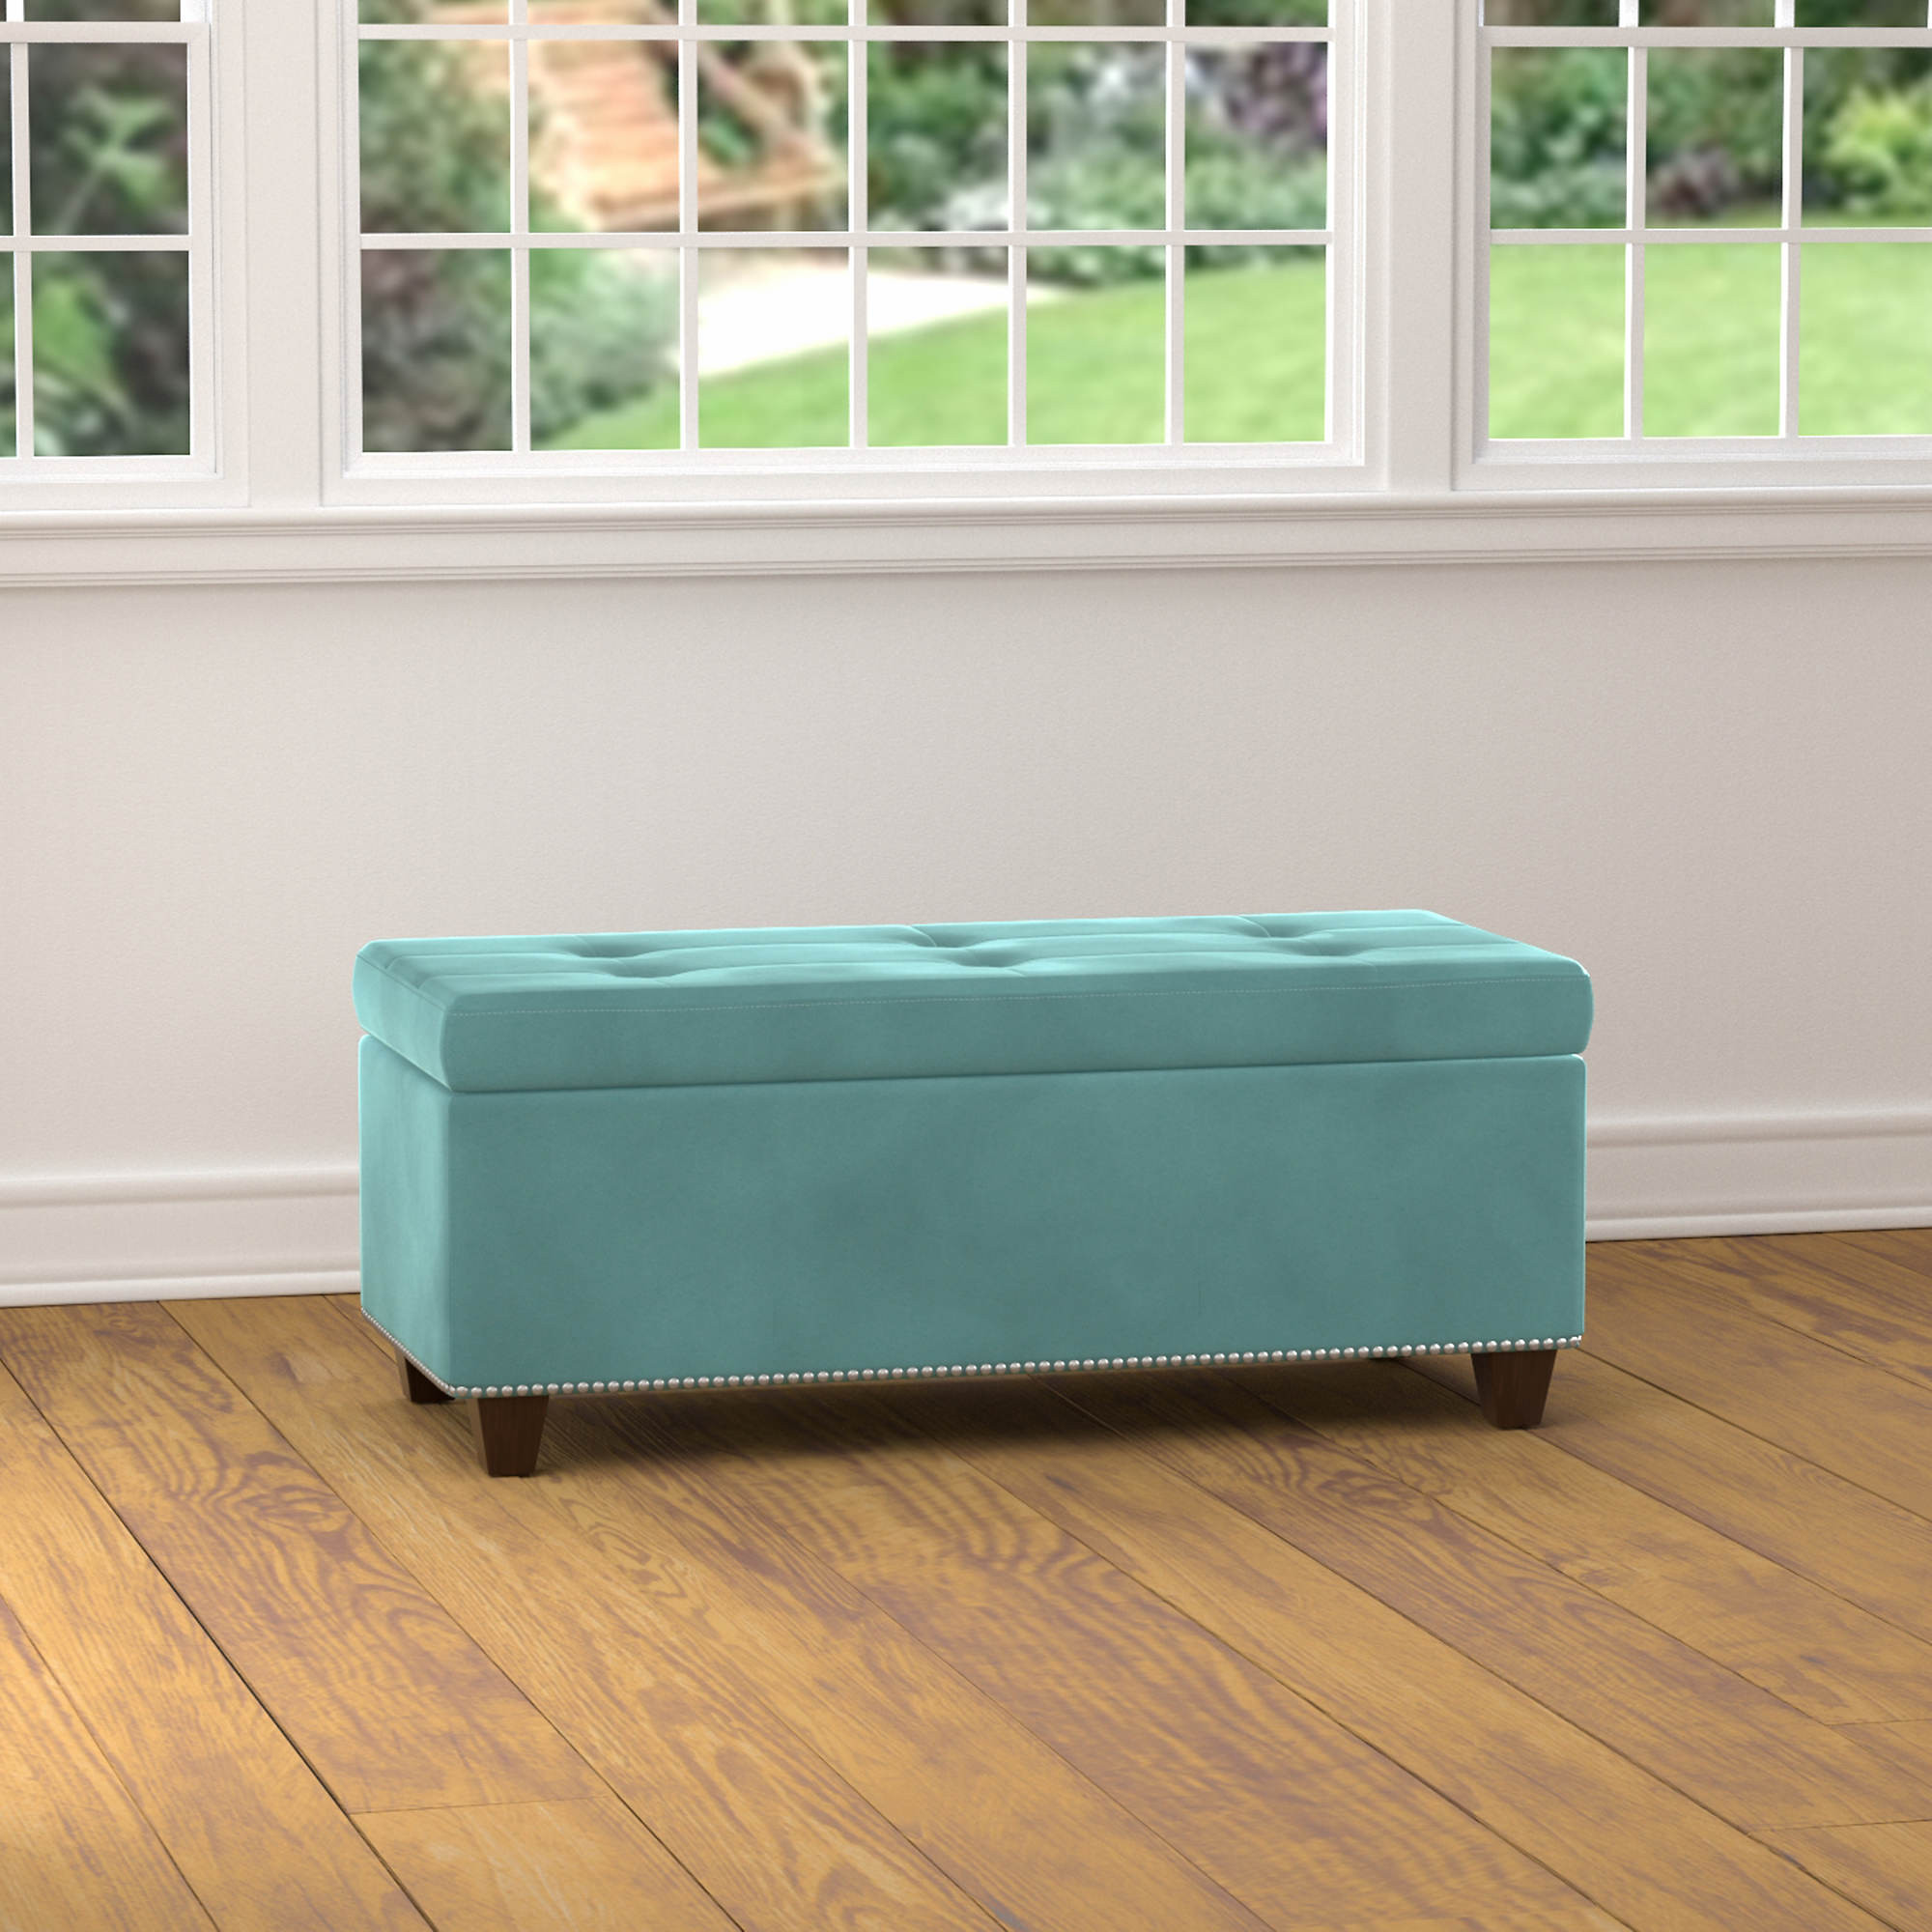 Turquoise Bench With Storage
 Handy Living Storage Ottoman Bench Turquoise Velvet BJ